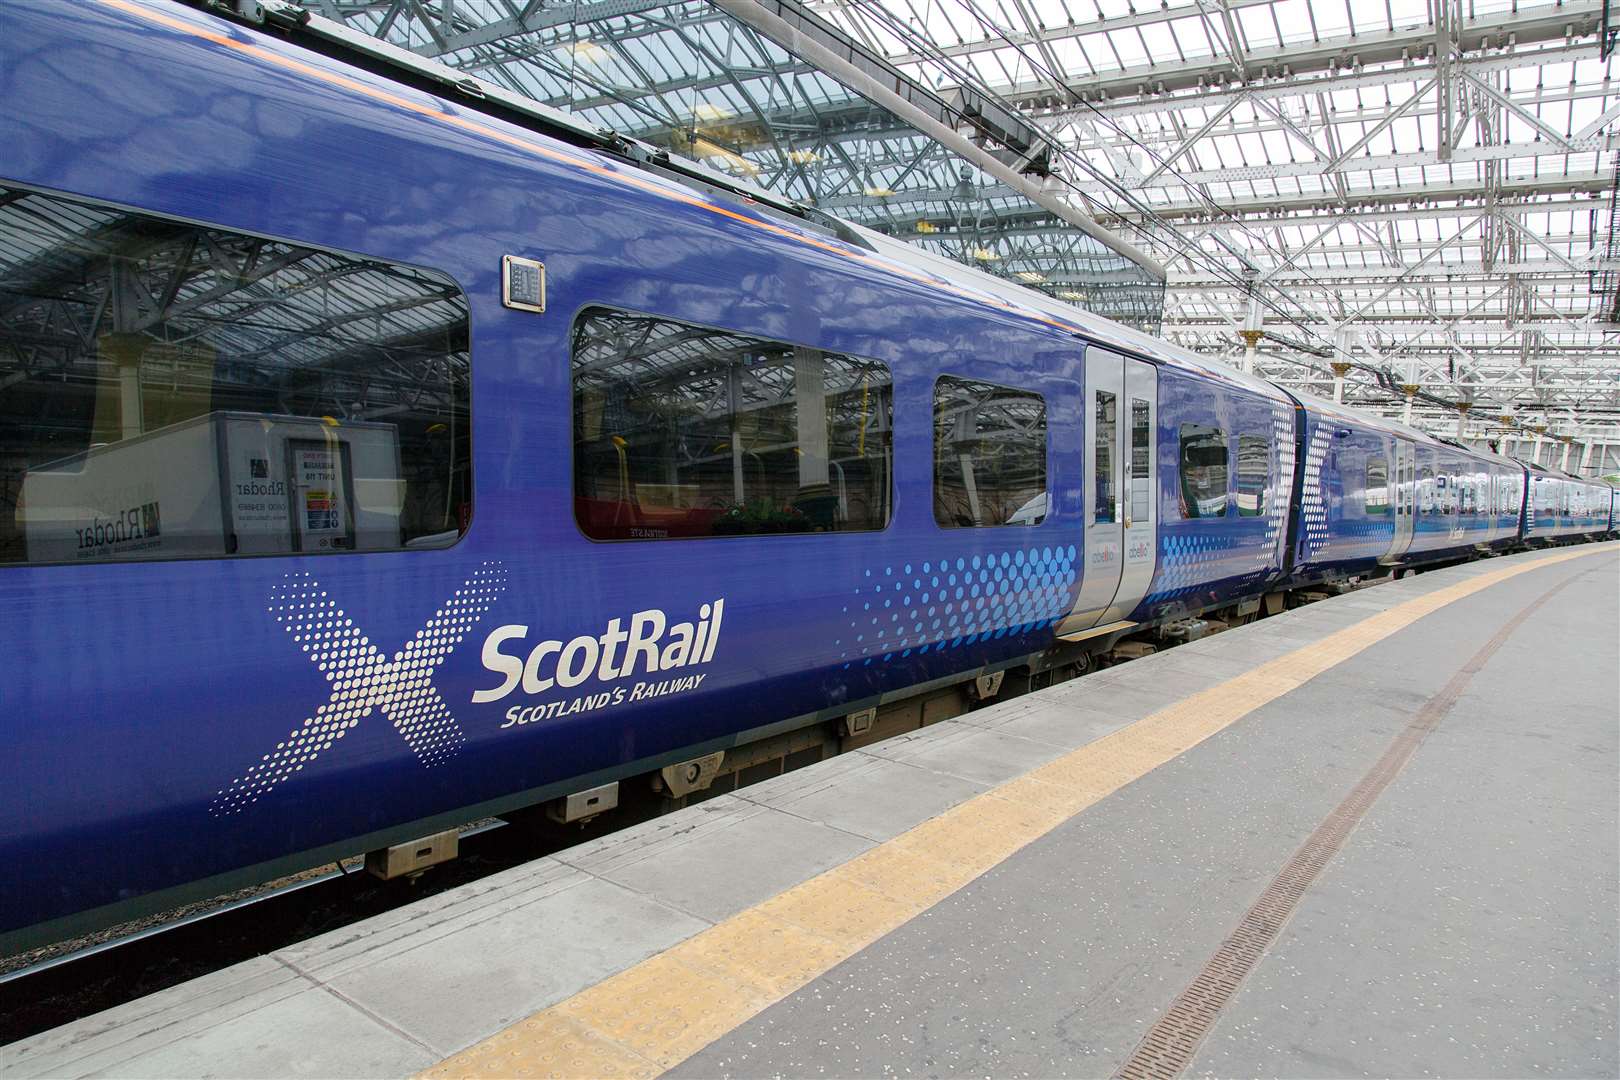 Train passengers faced an early morning cancellation in Inverness